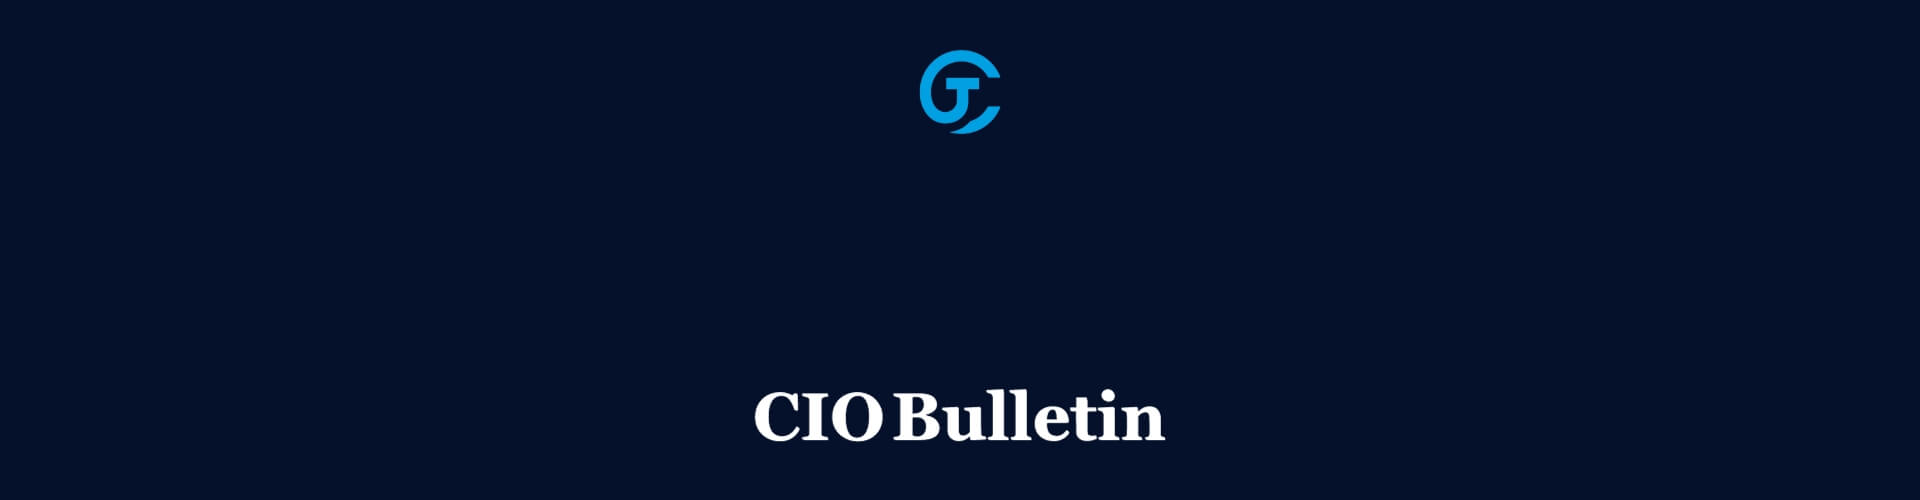 CIO Bulletin Cov Technologies named one company to watch in 2023